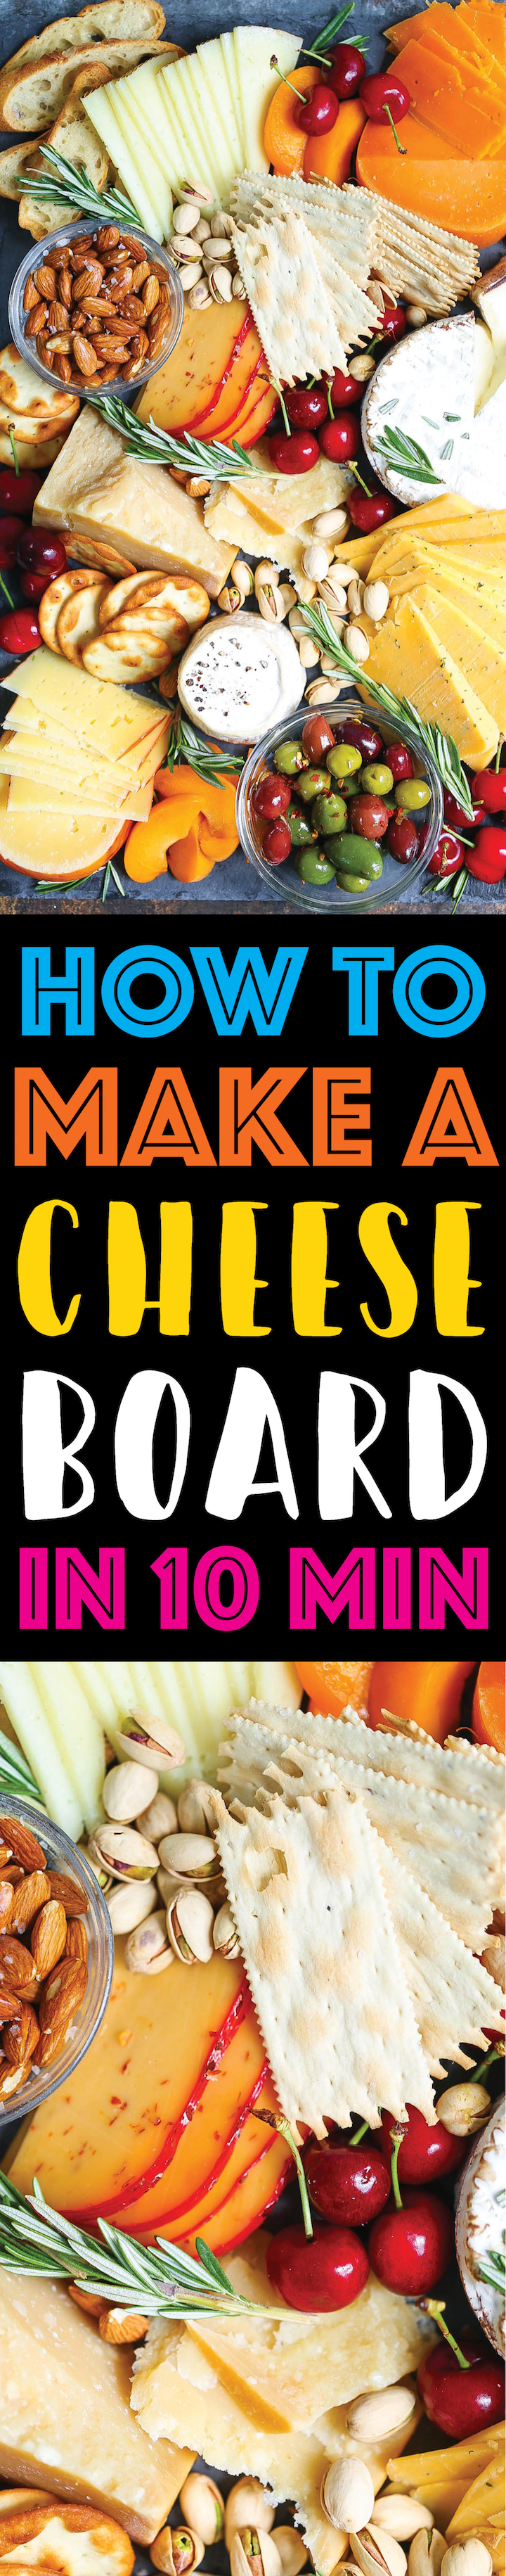 How-to-Make-an-Easy-Cheese-Board-in-10-Minutes.jpg